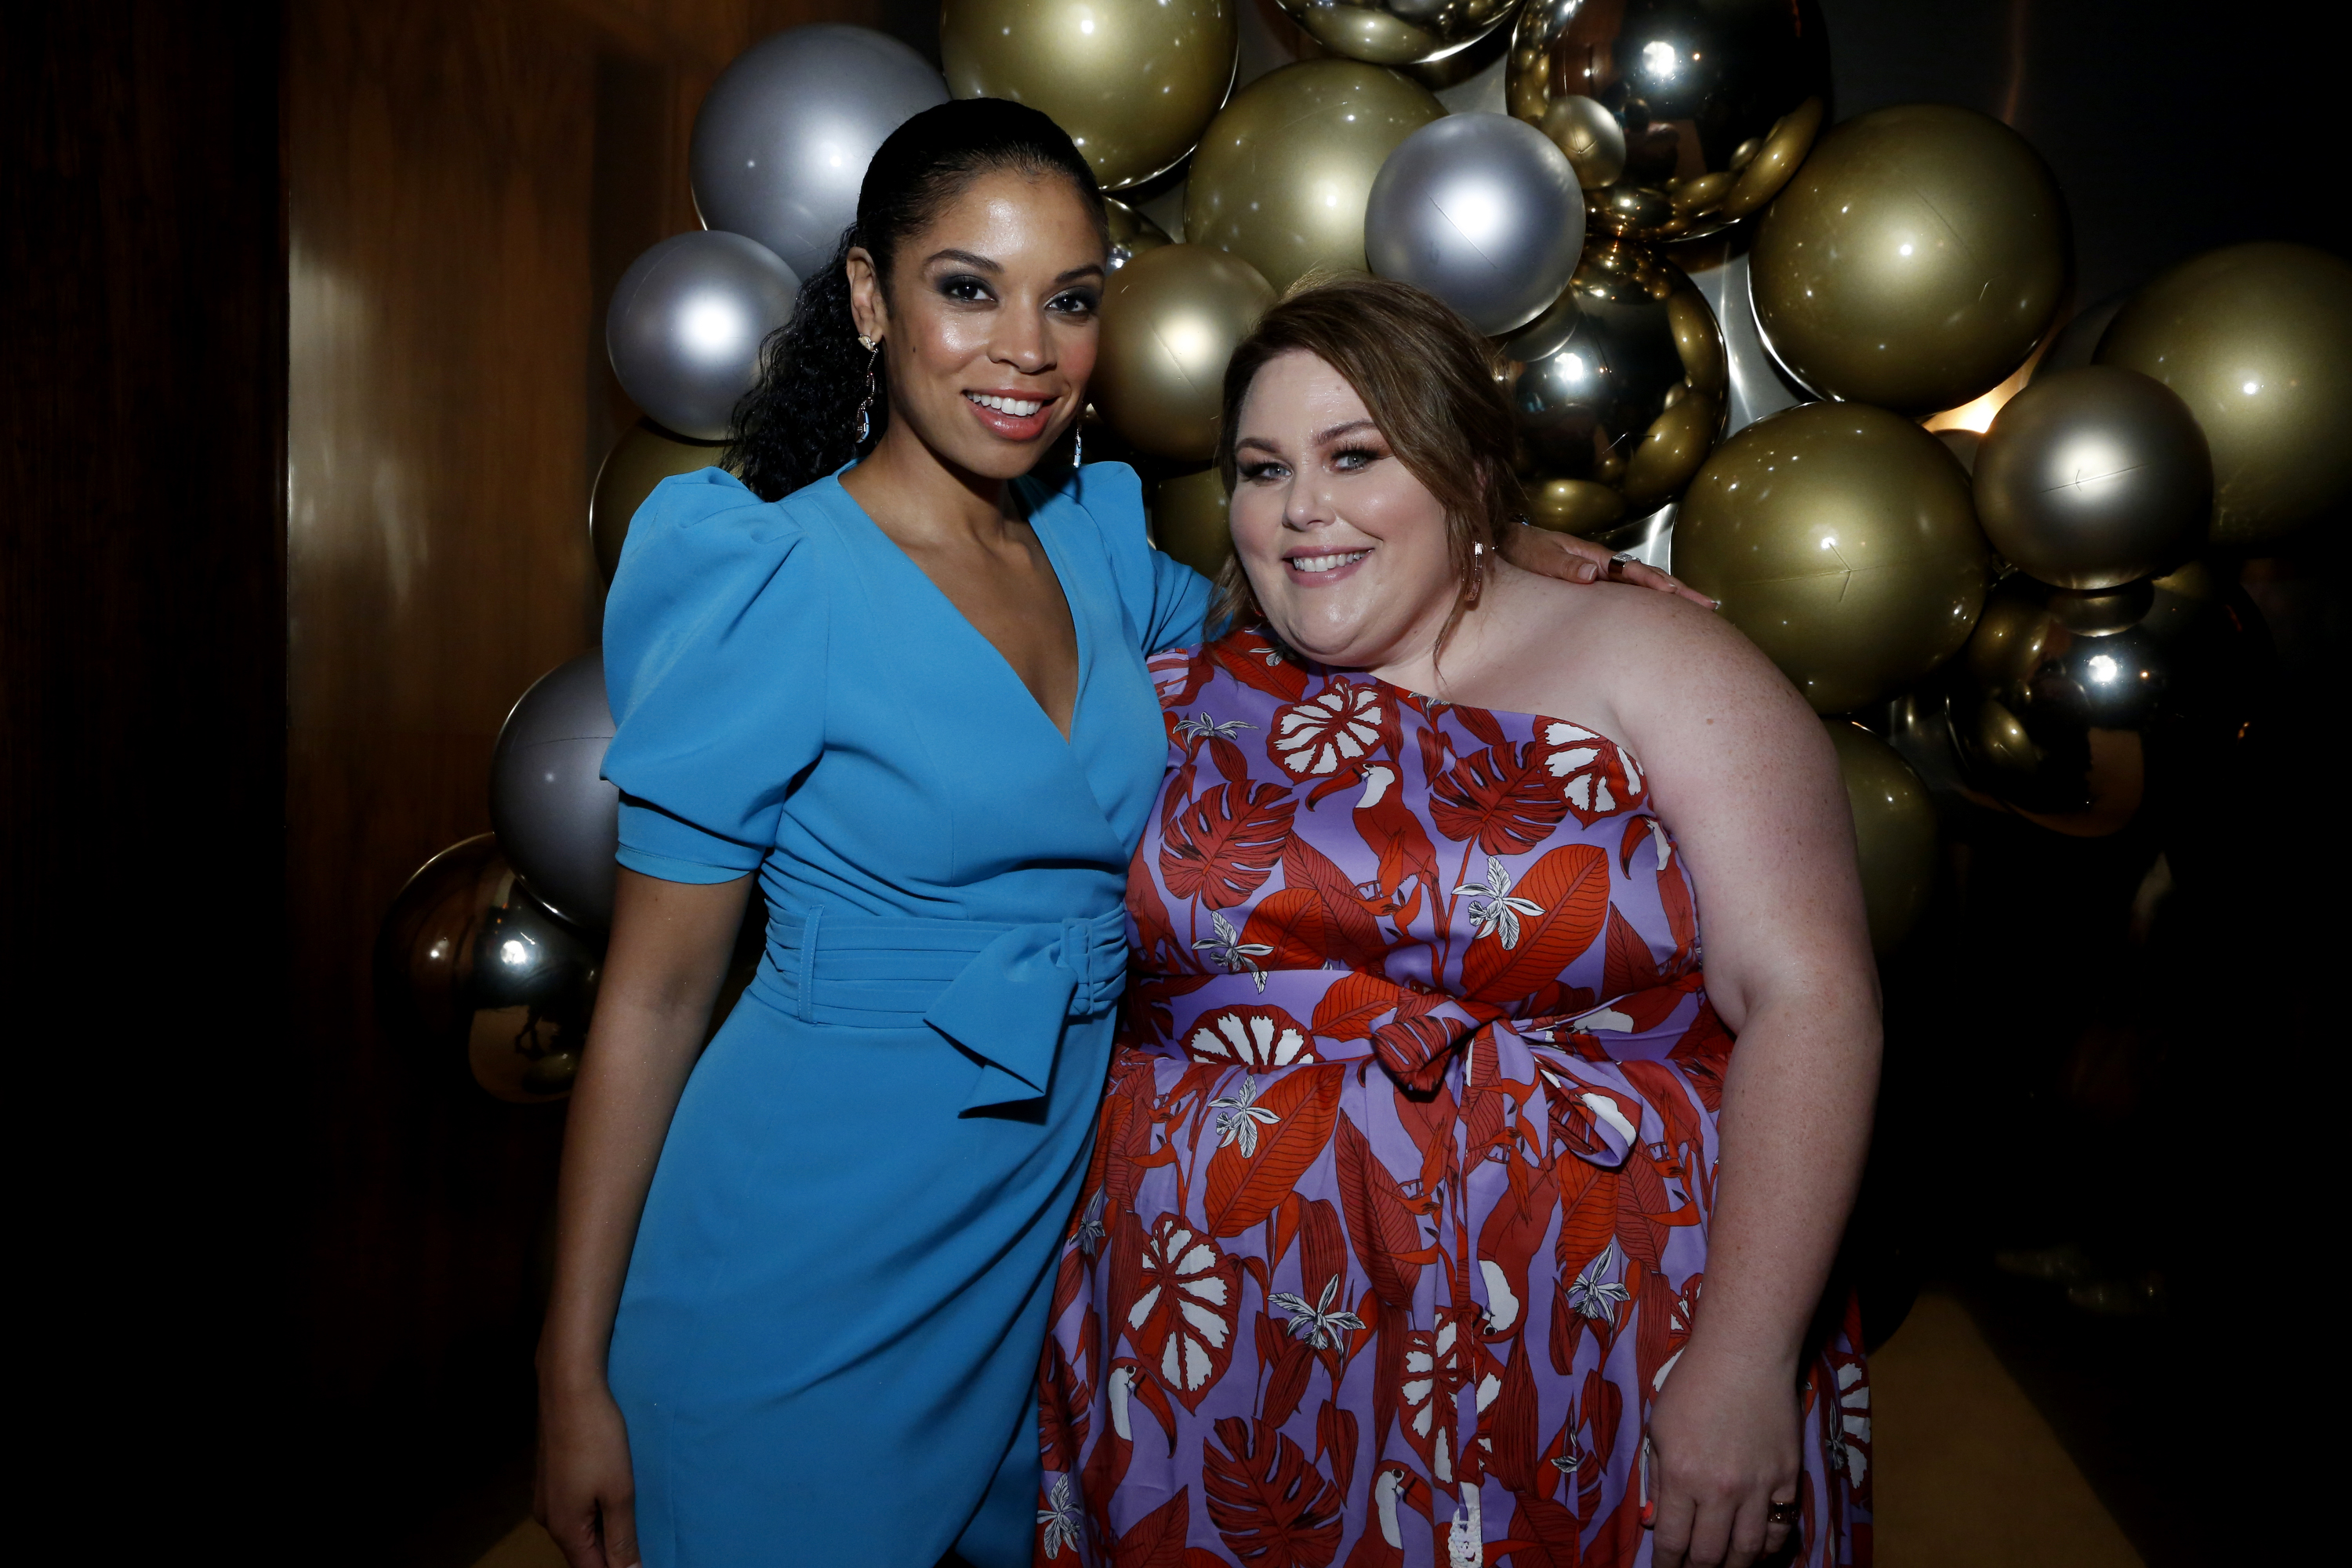 Susan Kelechi Watson, in a blue dress, with her arm around Chrissy Metz